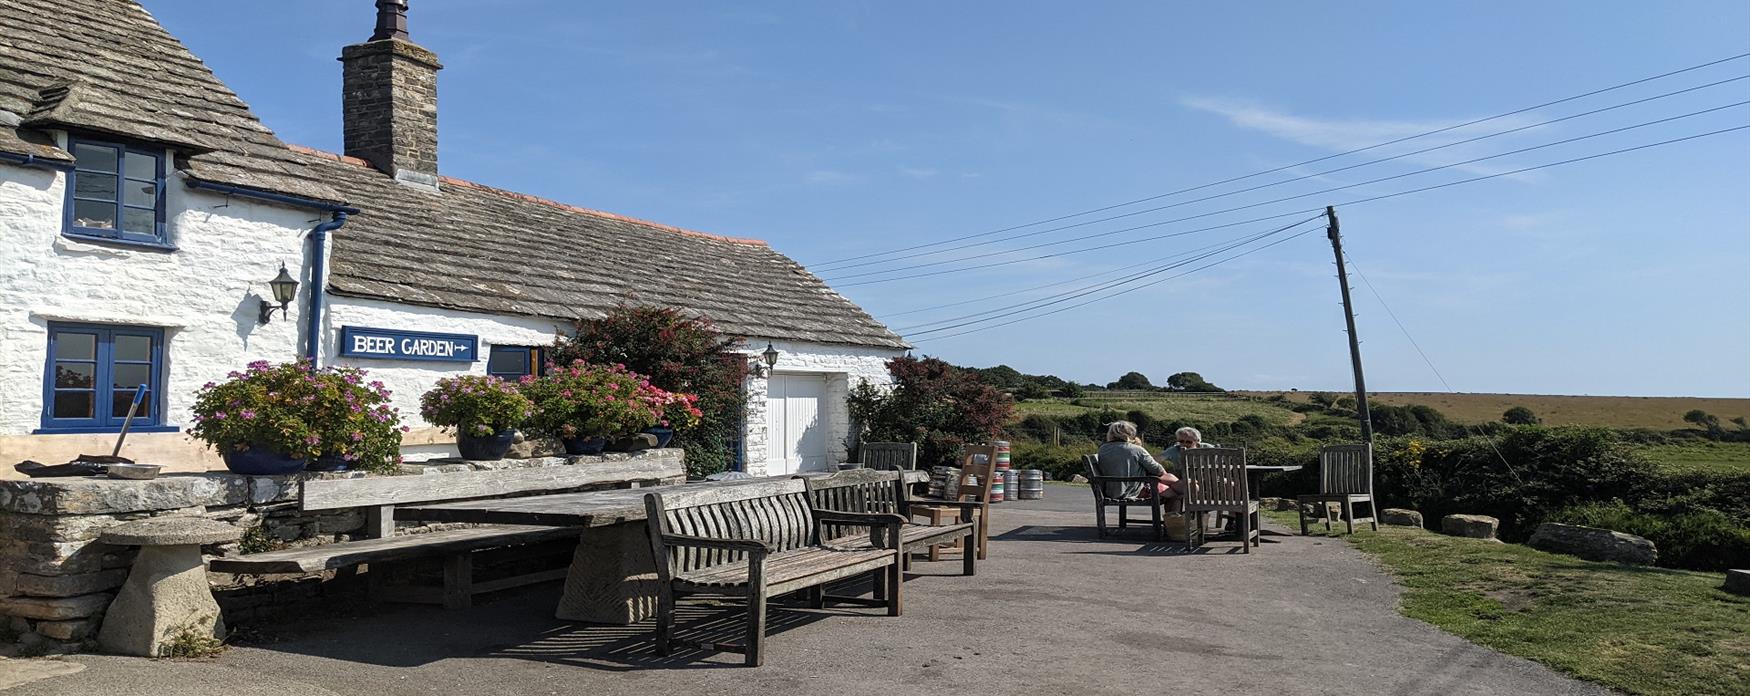 A white thatched cottage pub with a beer garden overlooking the hills and sea of Worth Matravers, Dorset, UK.